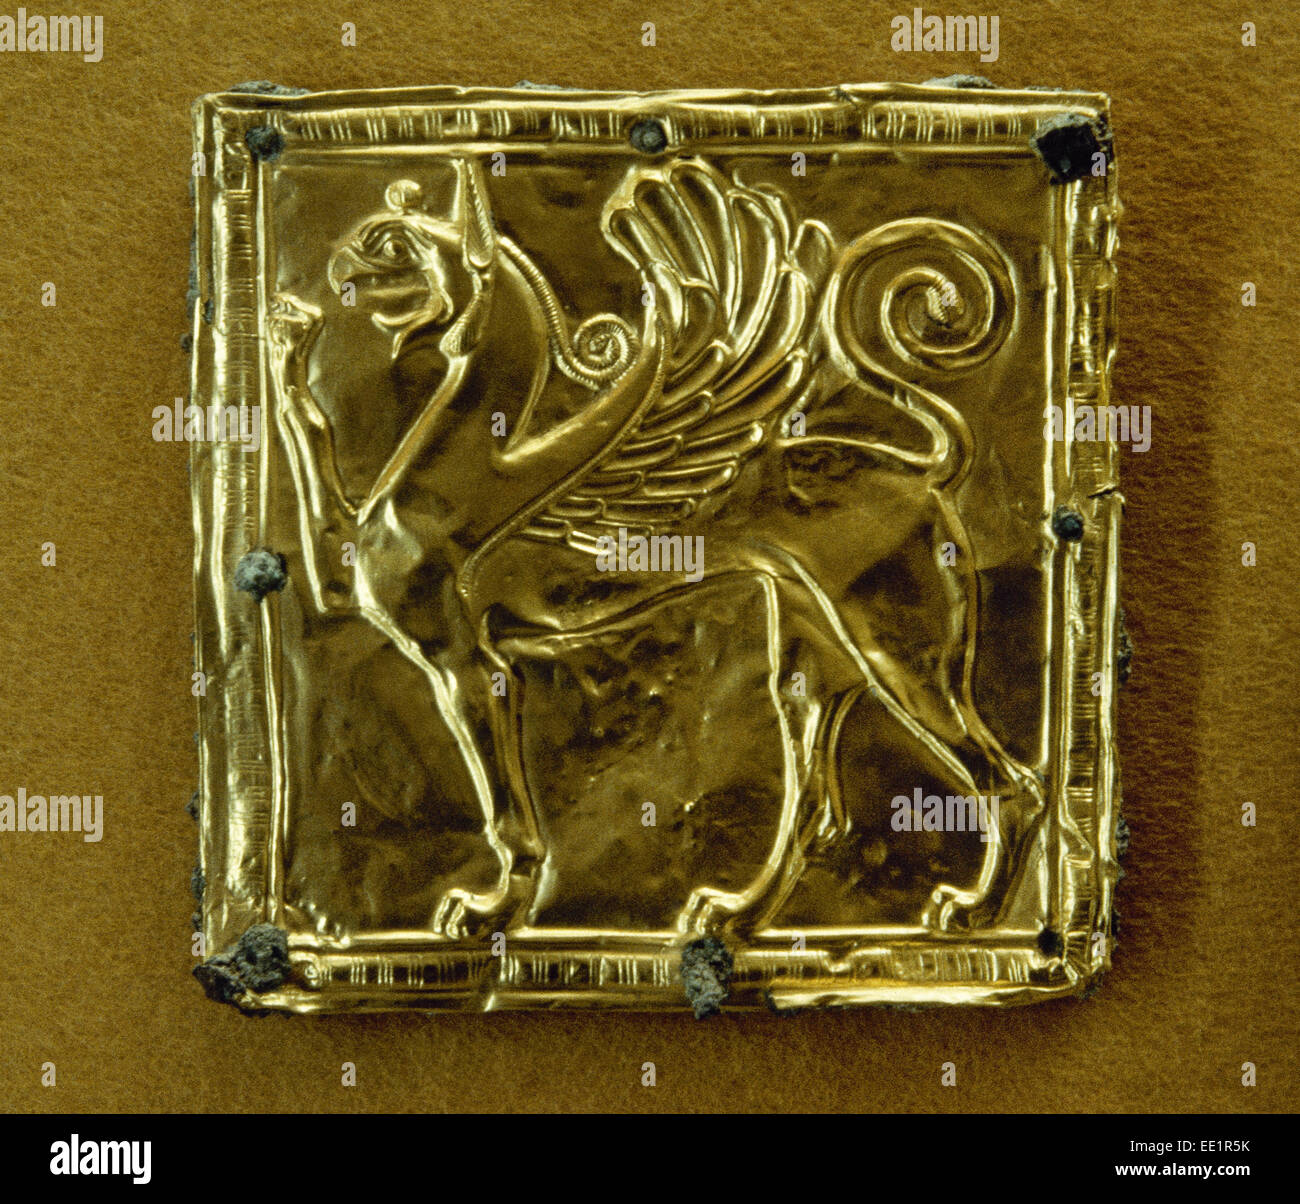 Greek Art. Gold plate depicting a winged griffin. 6th century B.C. Archeological Museum. Delphi. Greece. Stock Photo